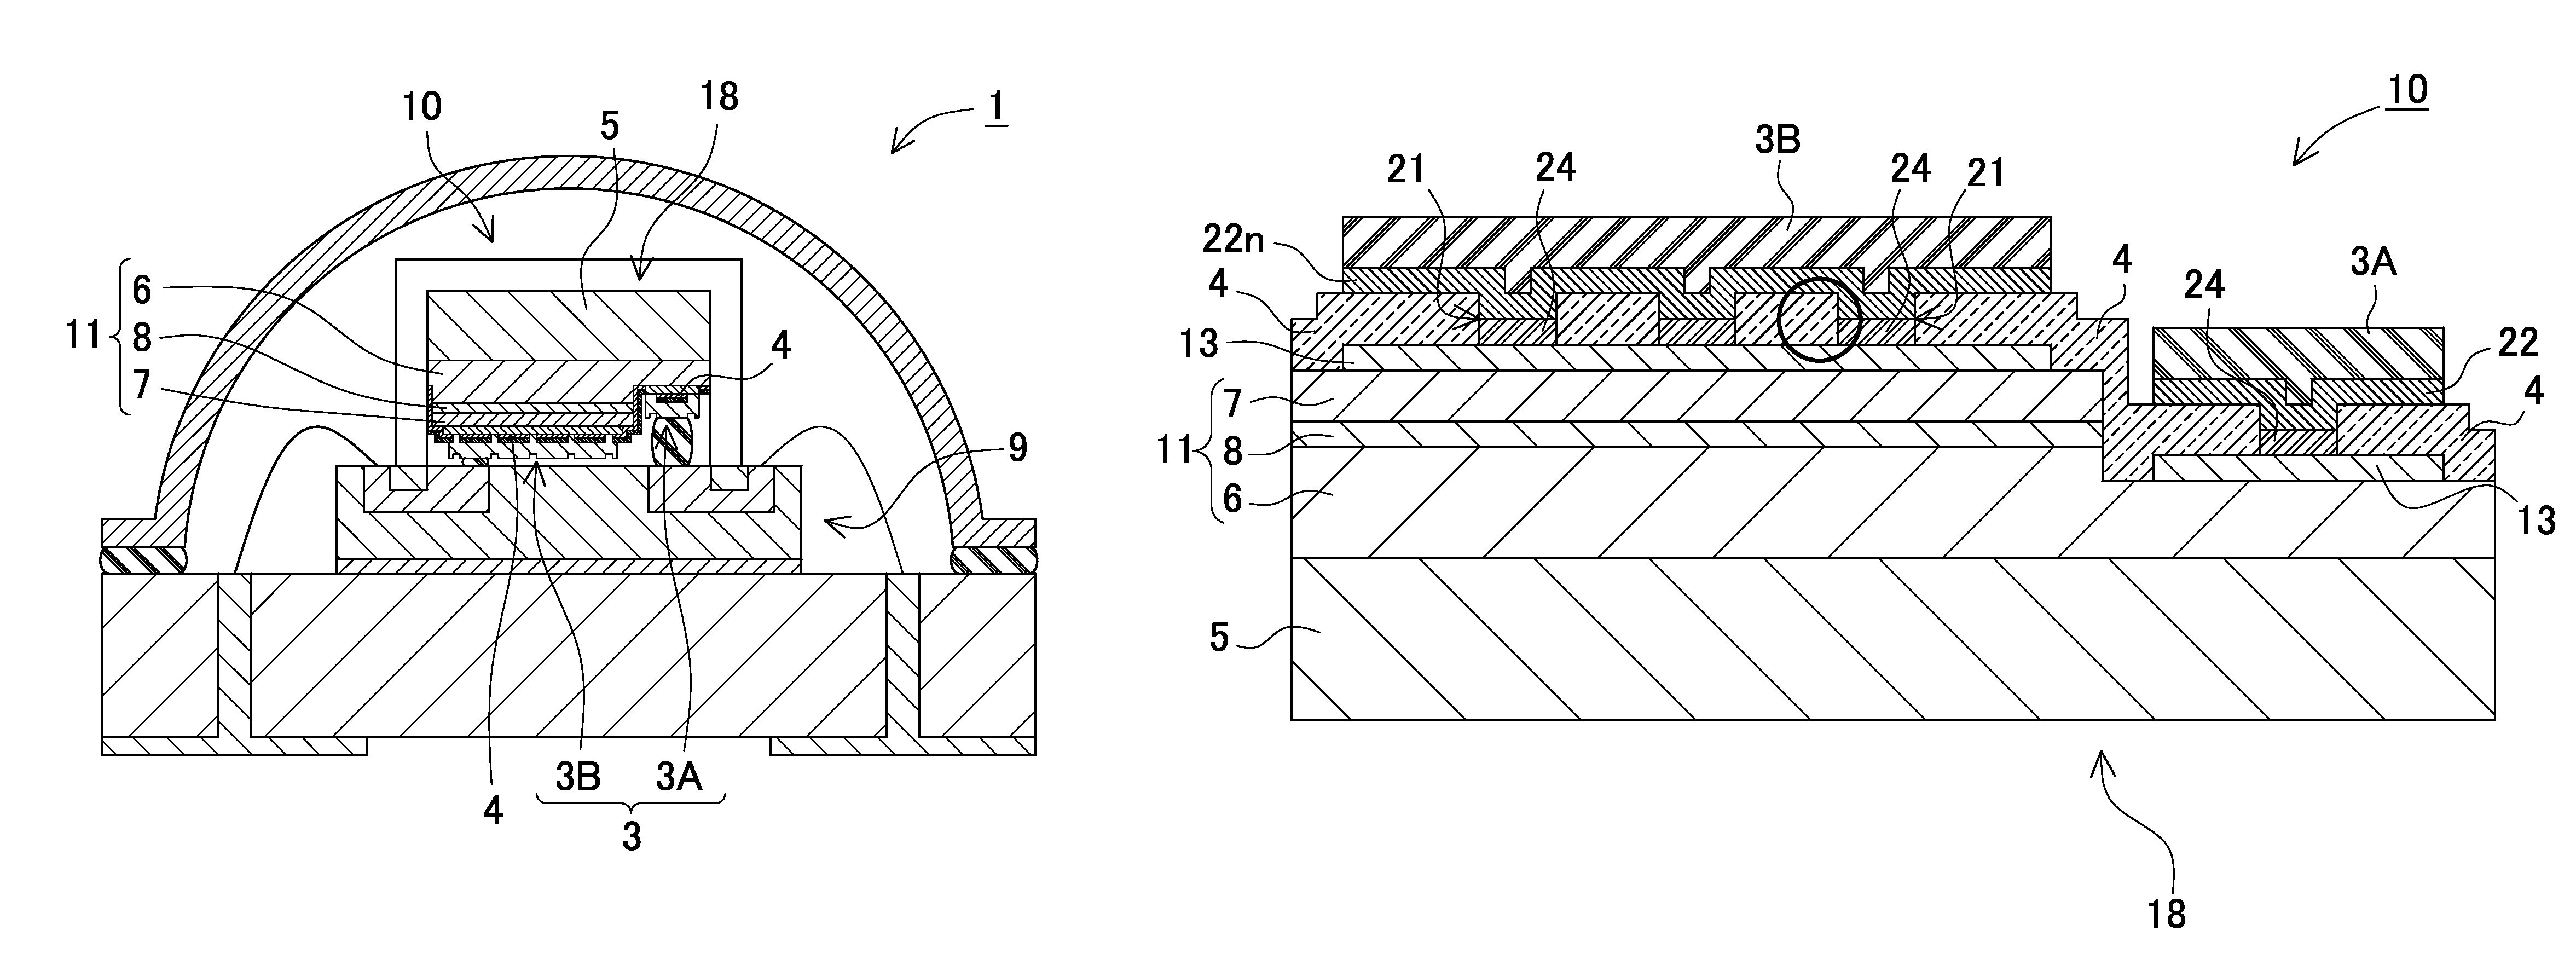 Semiconductor light emitting device including metal reflecting layer